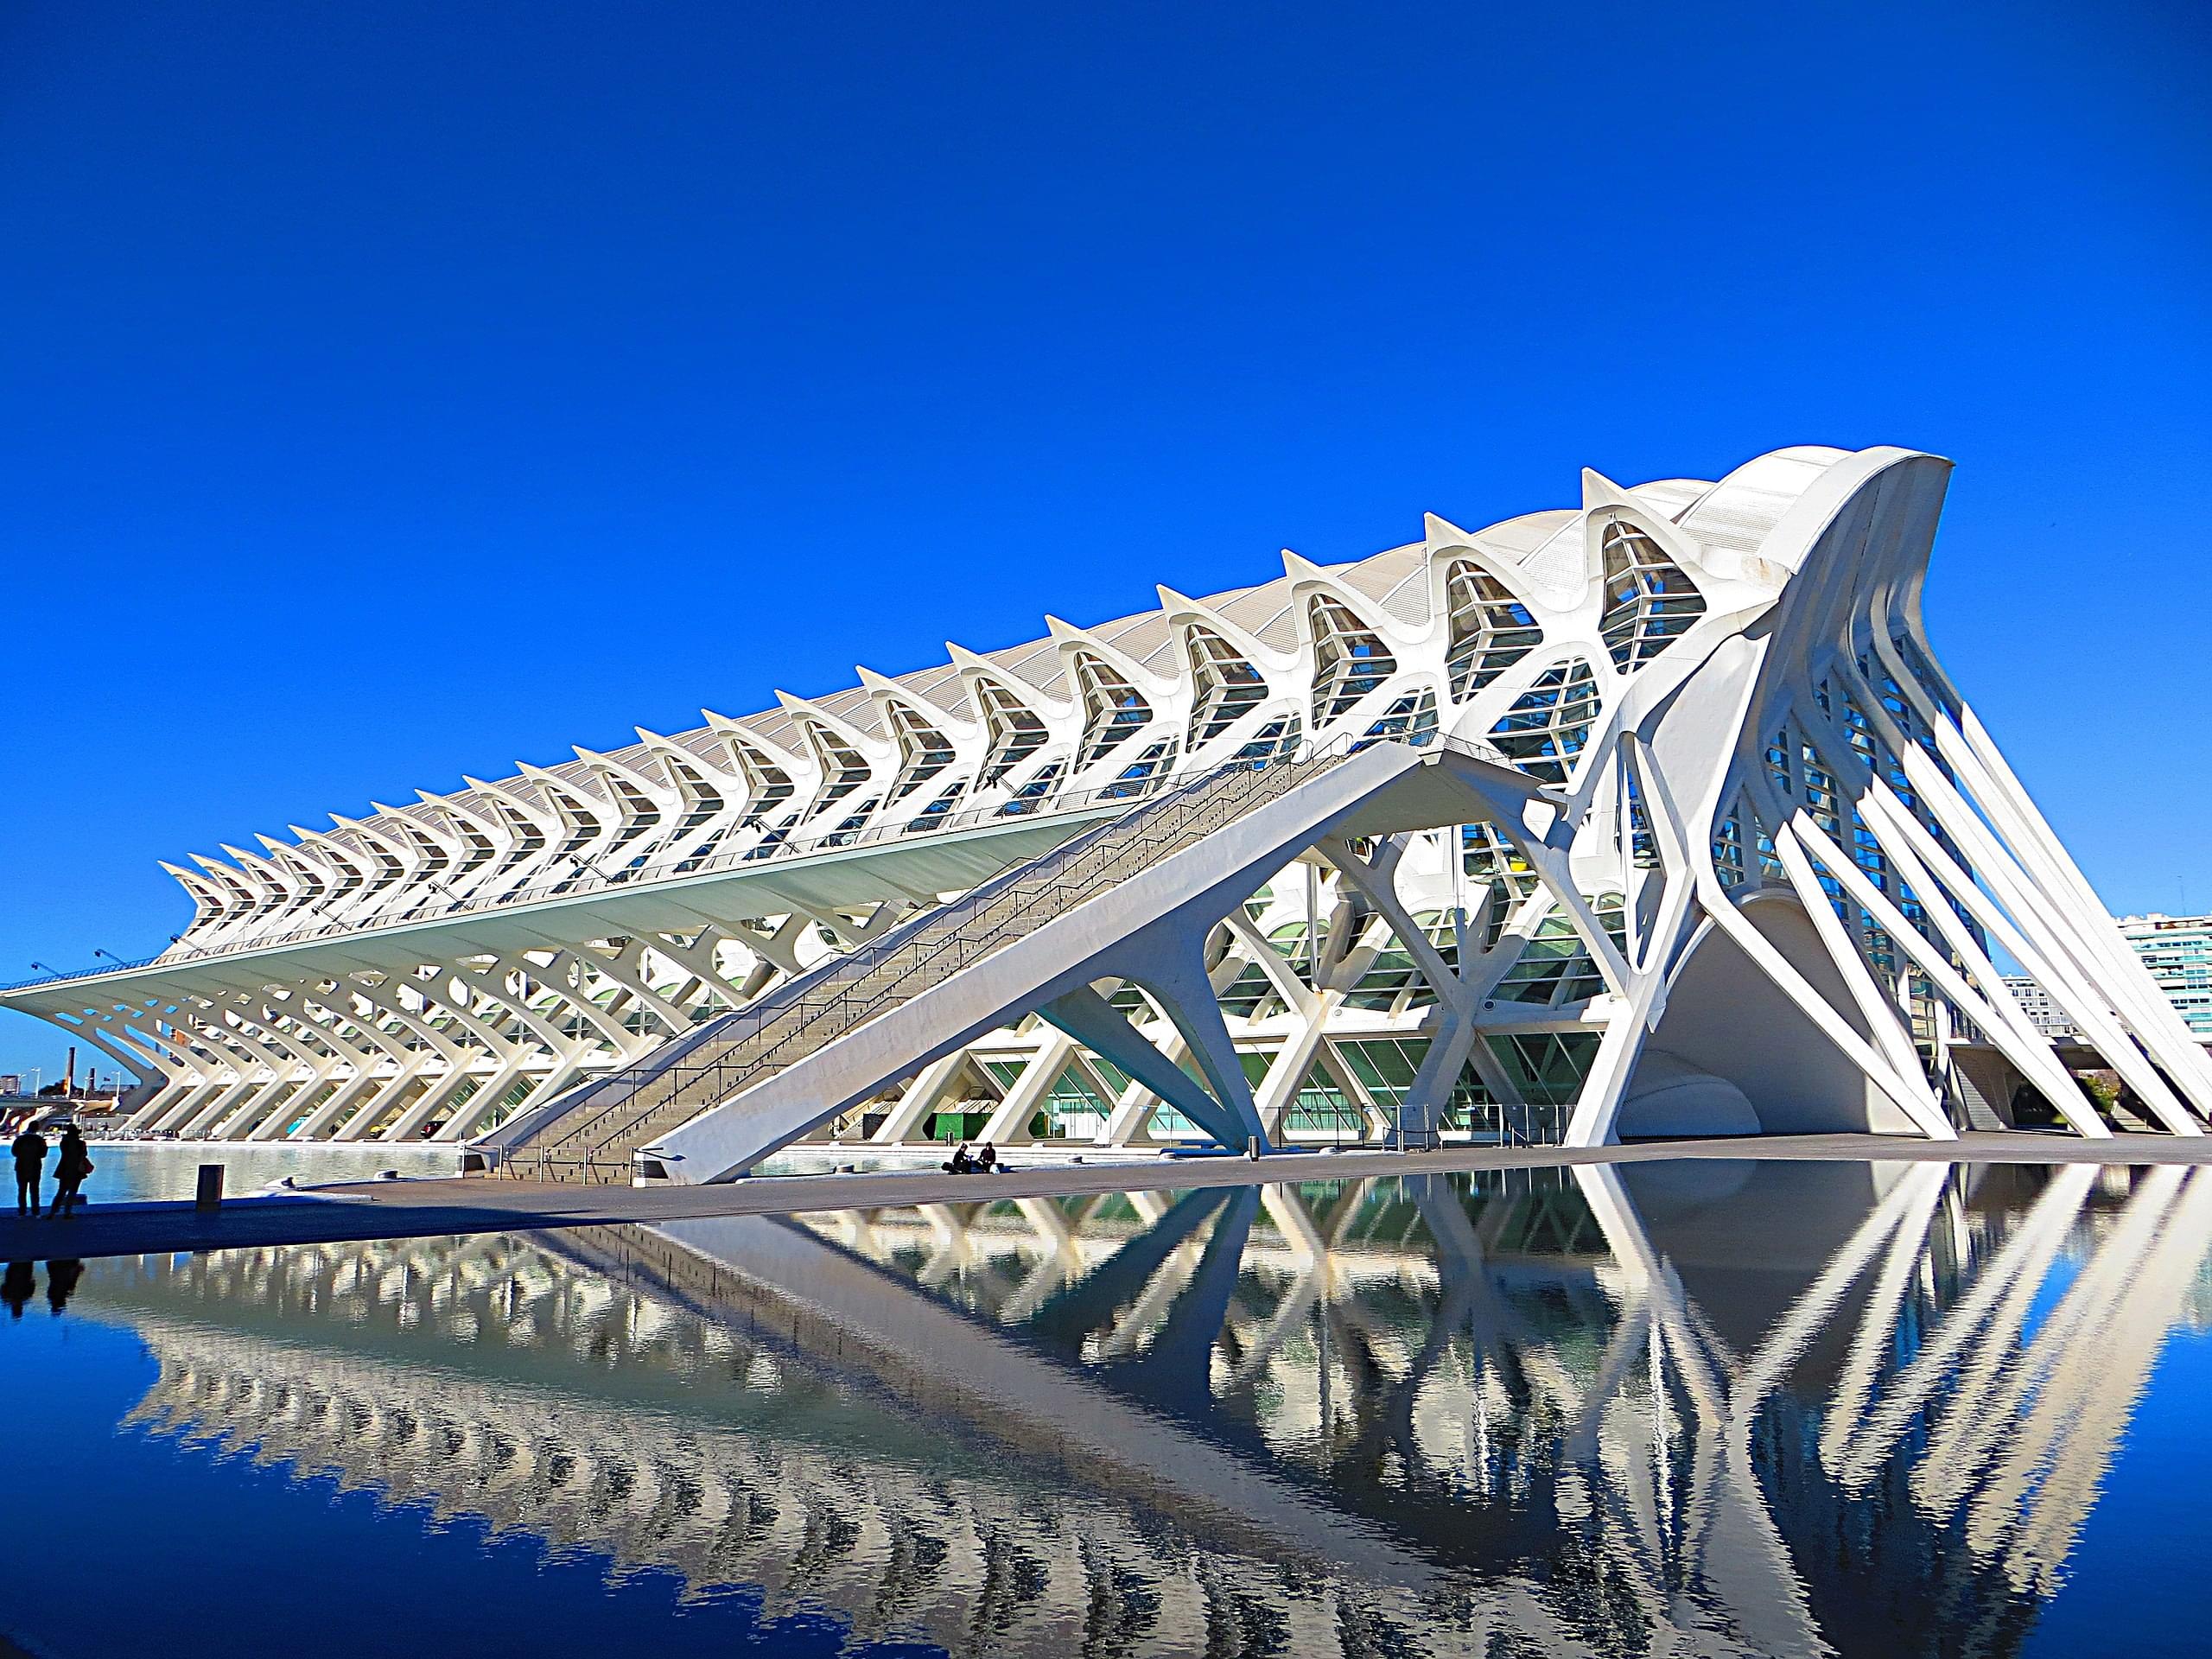 Get amazed by this whale skeleton shaped museum